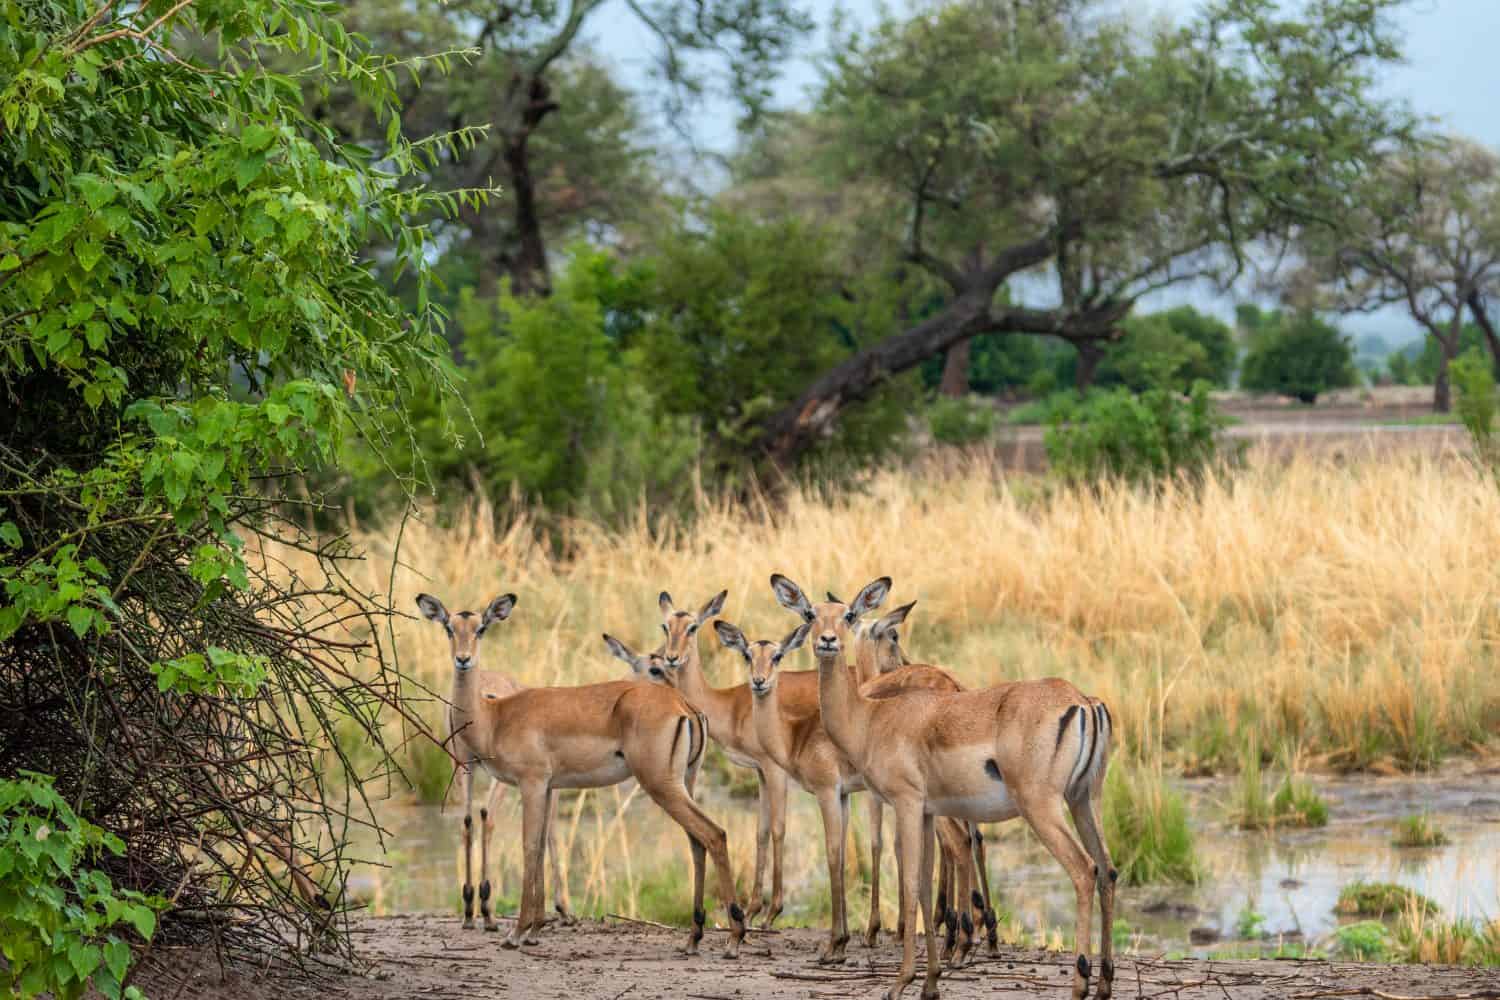 Babies impala stopping for the camera